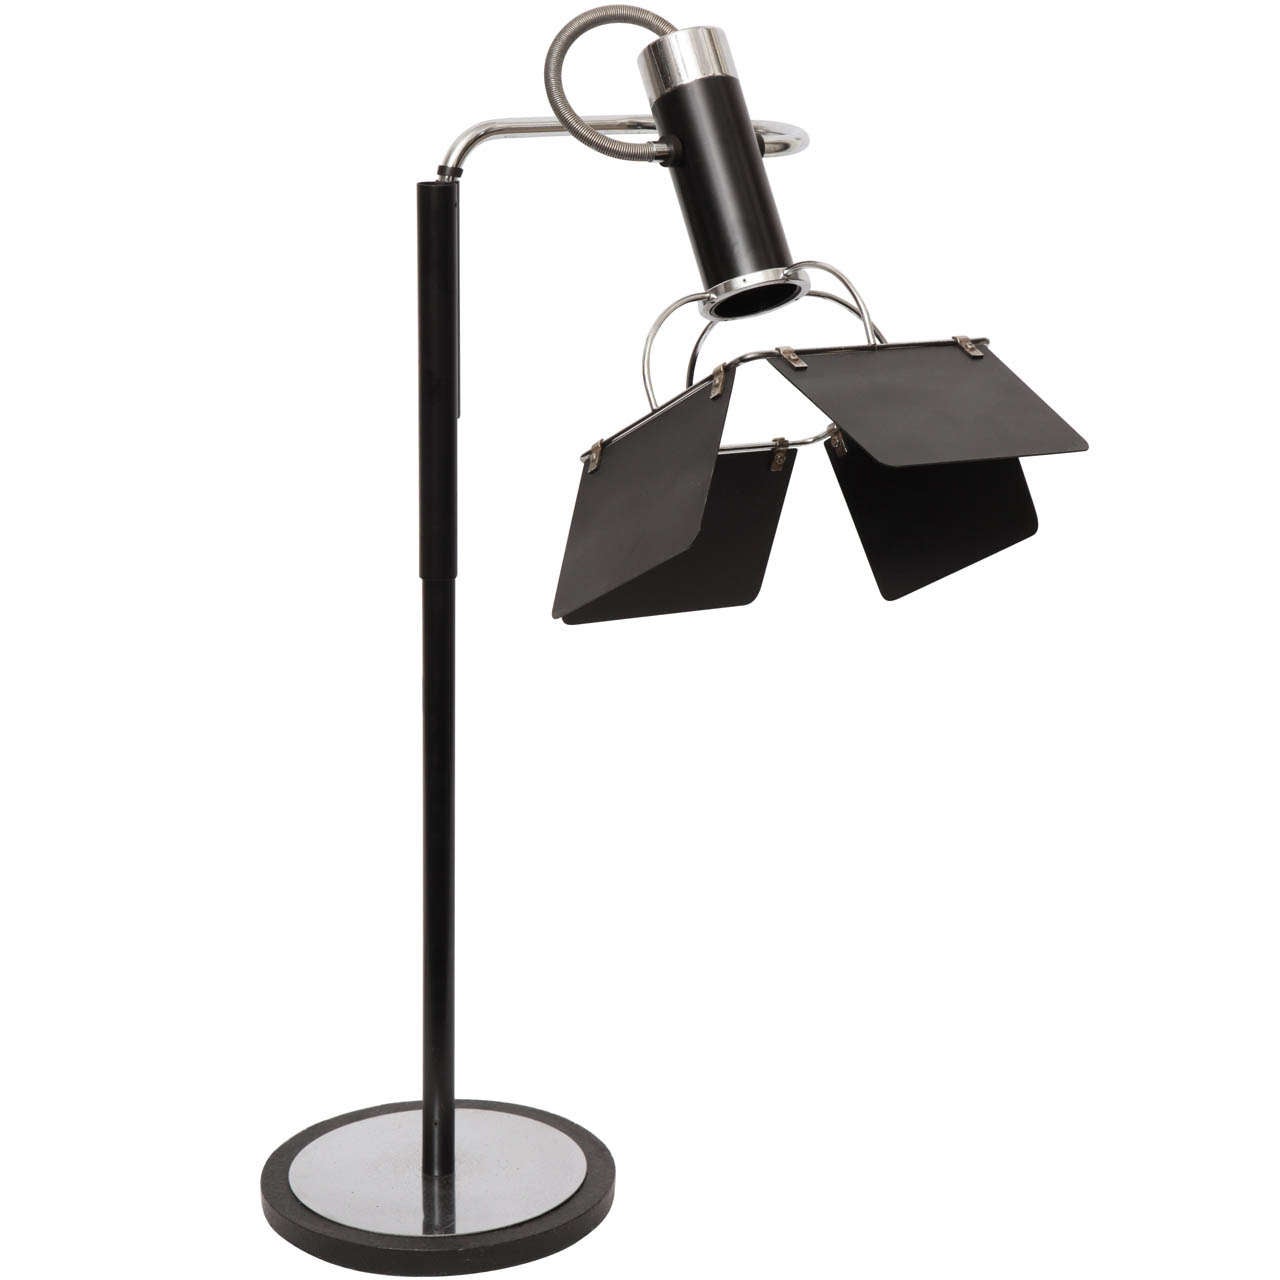 A 1930s American Modernist Articulated Table Lamp